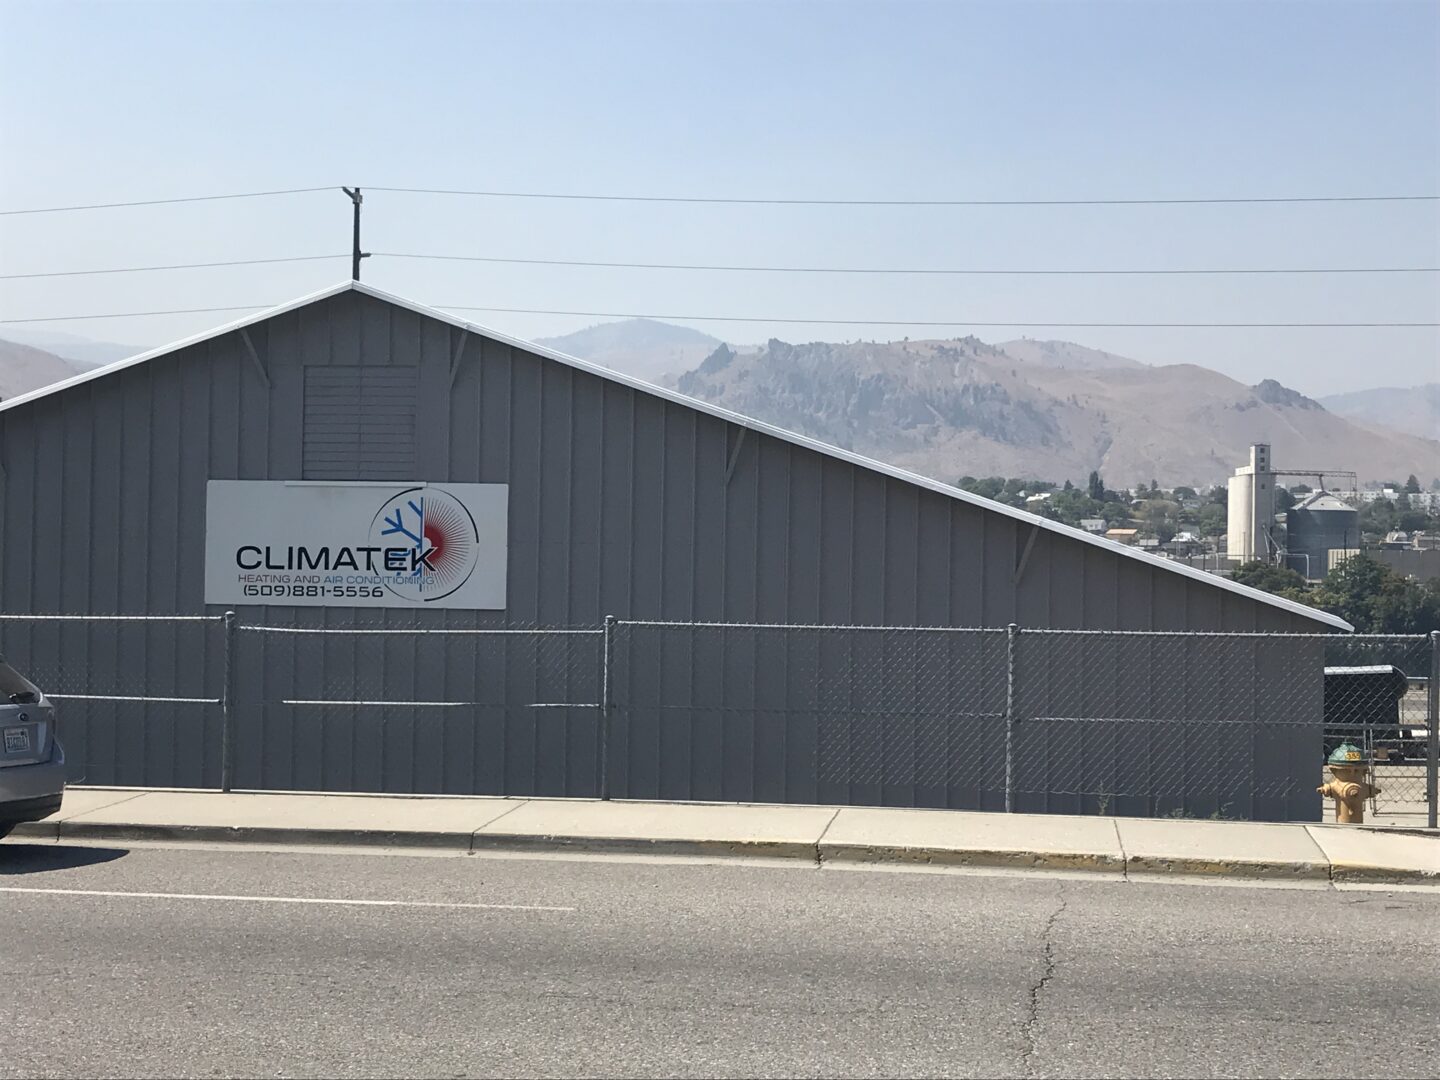 Long view of climatek logo on the store